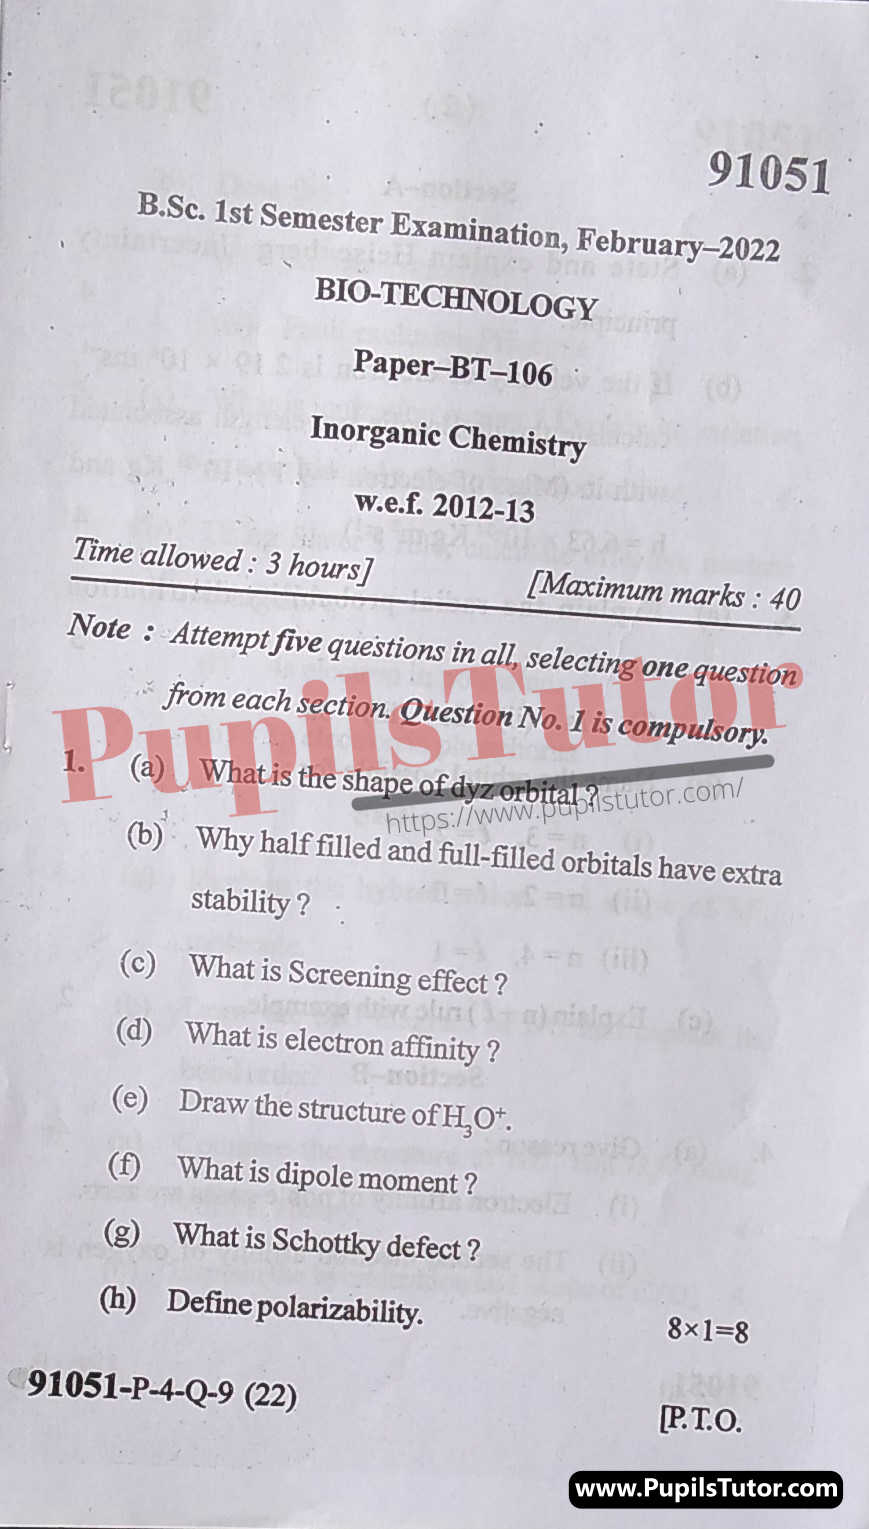 MDU (Maharshi Dayanand University, Rohtak Haryana) BSc Biotechnology Pass Course First Semester Previous Year Inorganic Chemistry Question Paper For February, 2022 Exam (Question Paper Page 1) - pupilstutor.com